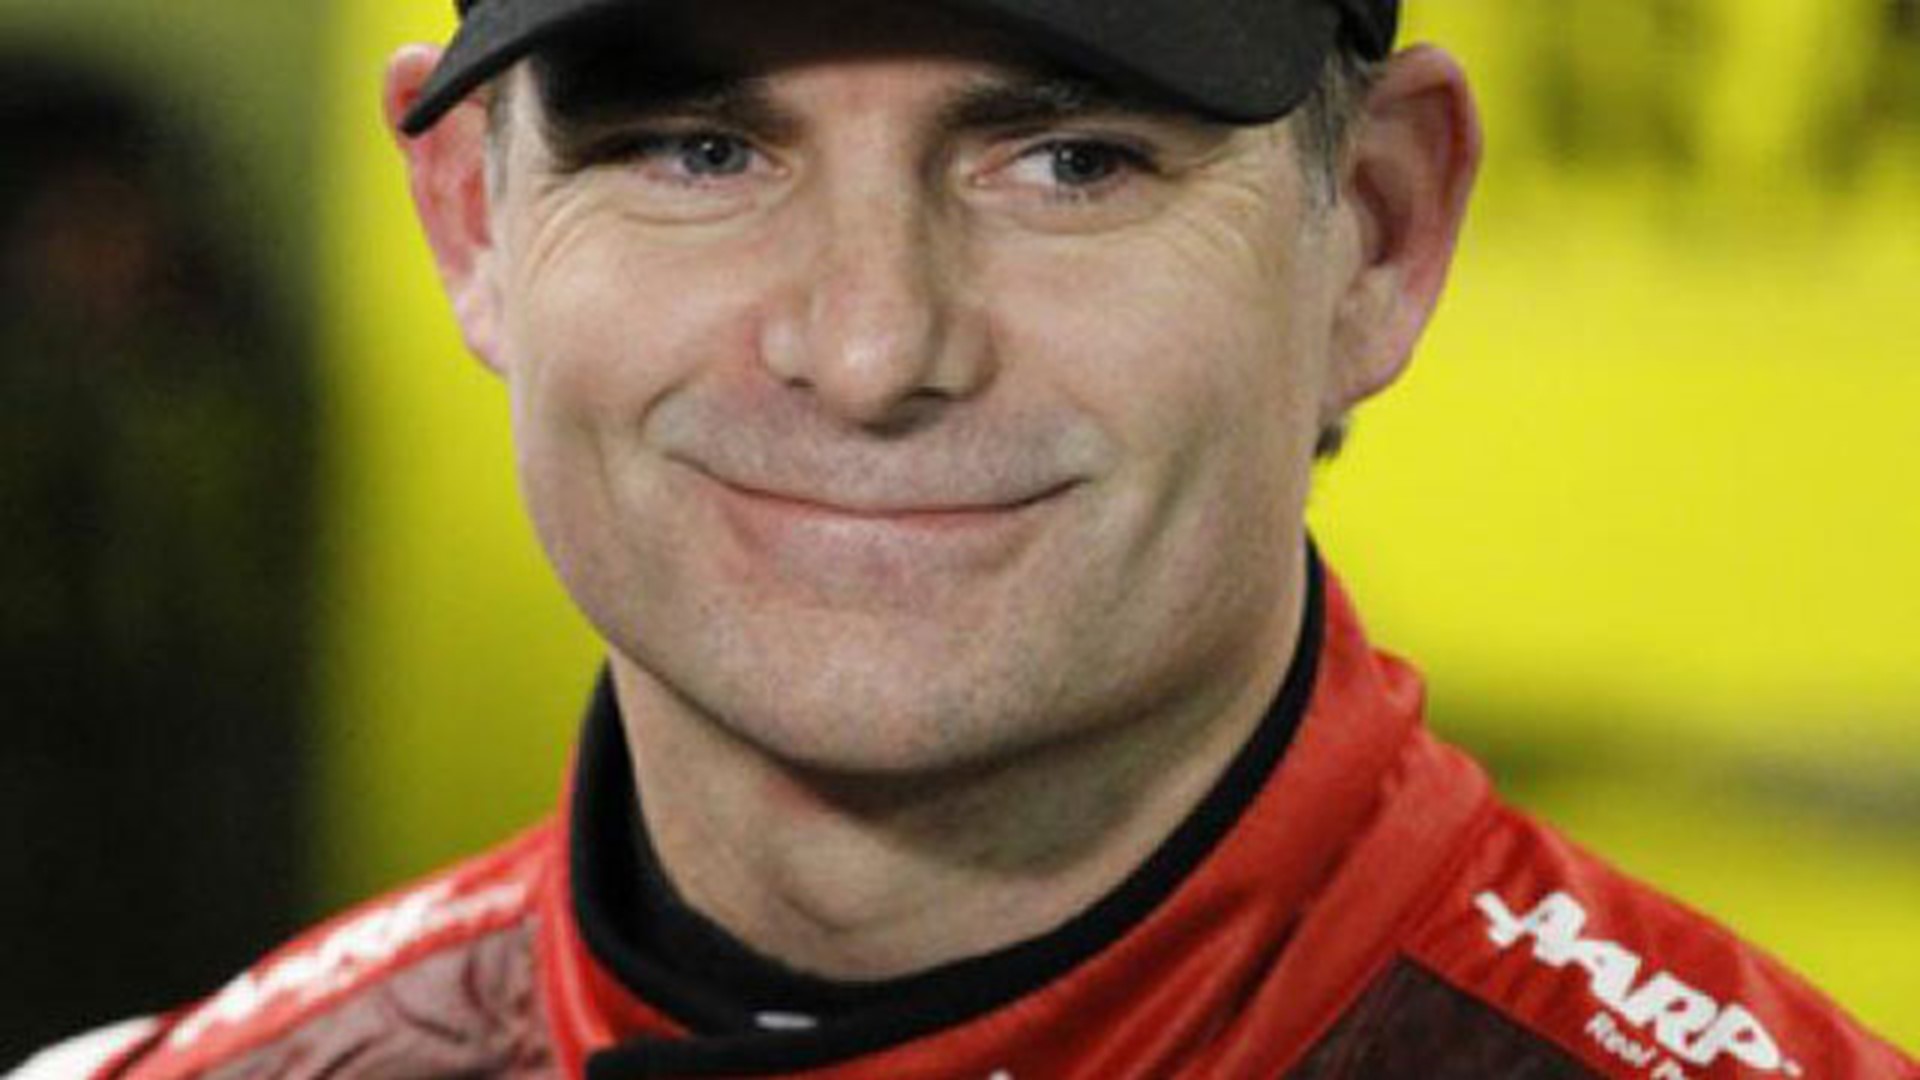 Five-time Brickyard 400 winner Jeff Gordon was back at IMS — in a midget car on the dirt track.